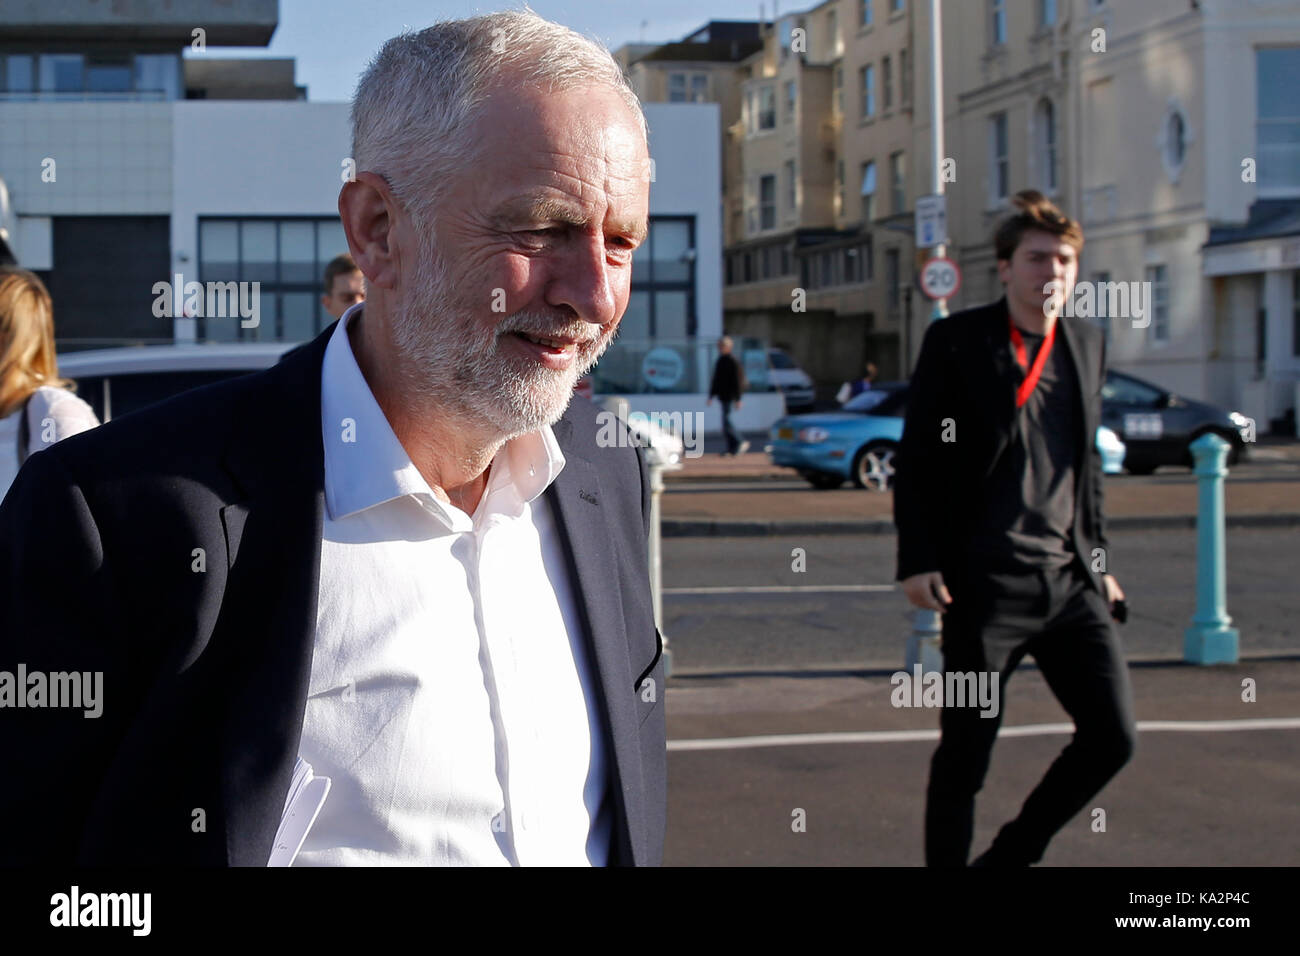 Brighton, UK. 24th September, 2017. Jeremy Corbyn, leader of Britain's opposition Labour party arrives to do an interview for the 'Andrew Marr Show' during the annual Labour Party Conference in Brighton, UK Sunday, September 24, 2017. Photograph : Credit: Luke MacGregor/Alamy Live News Stock Photo